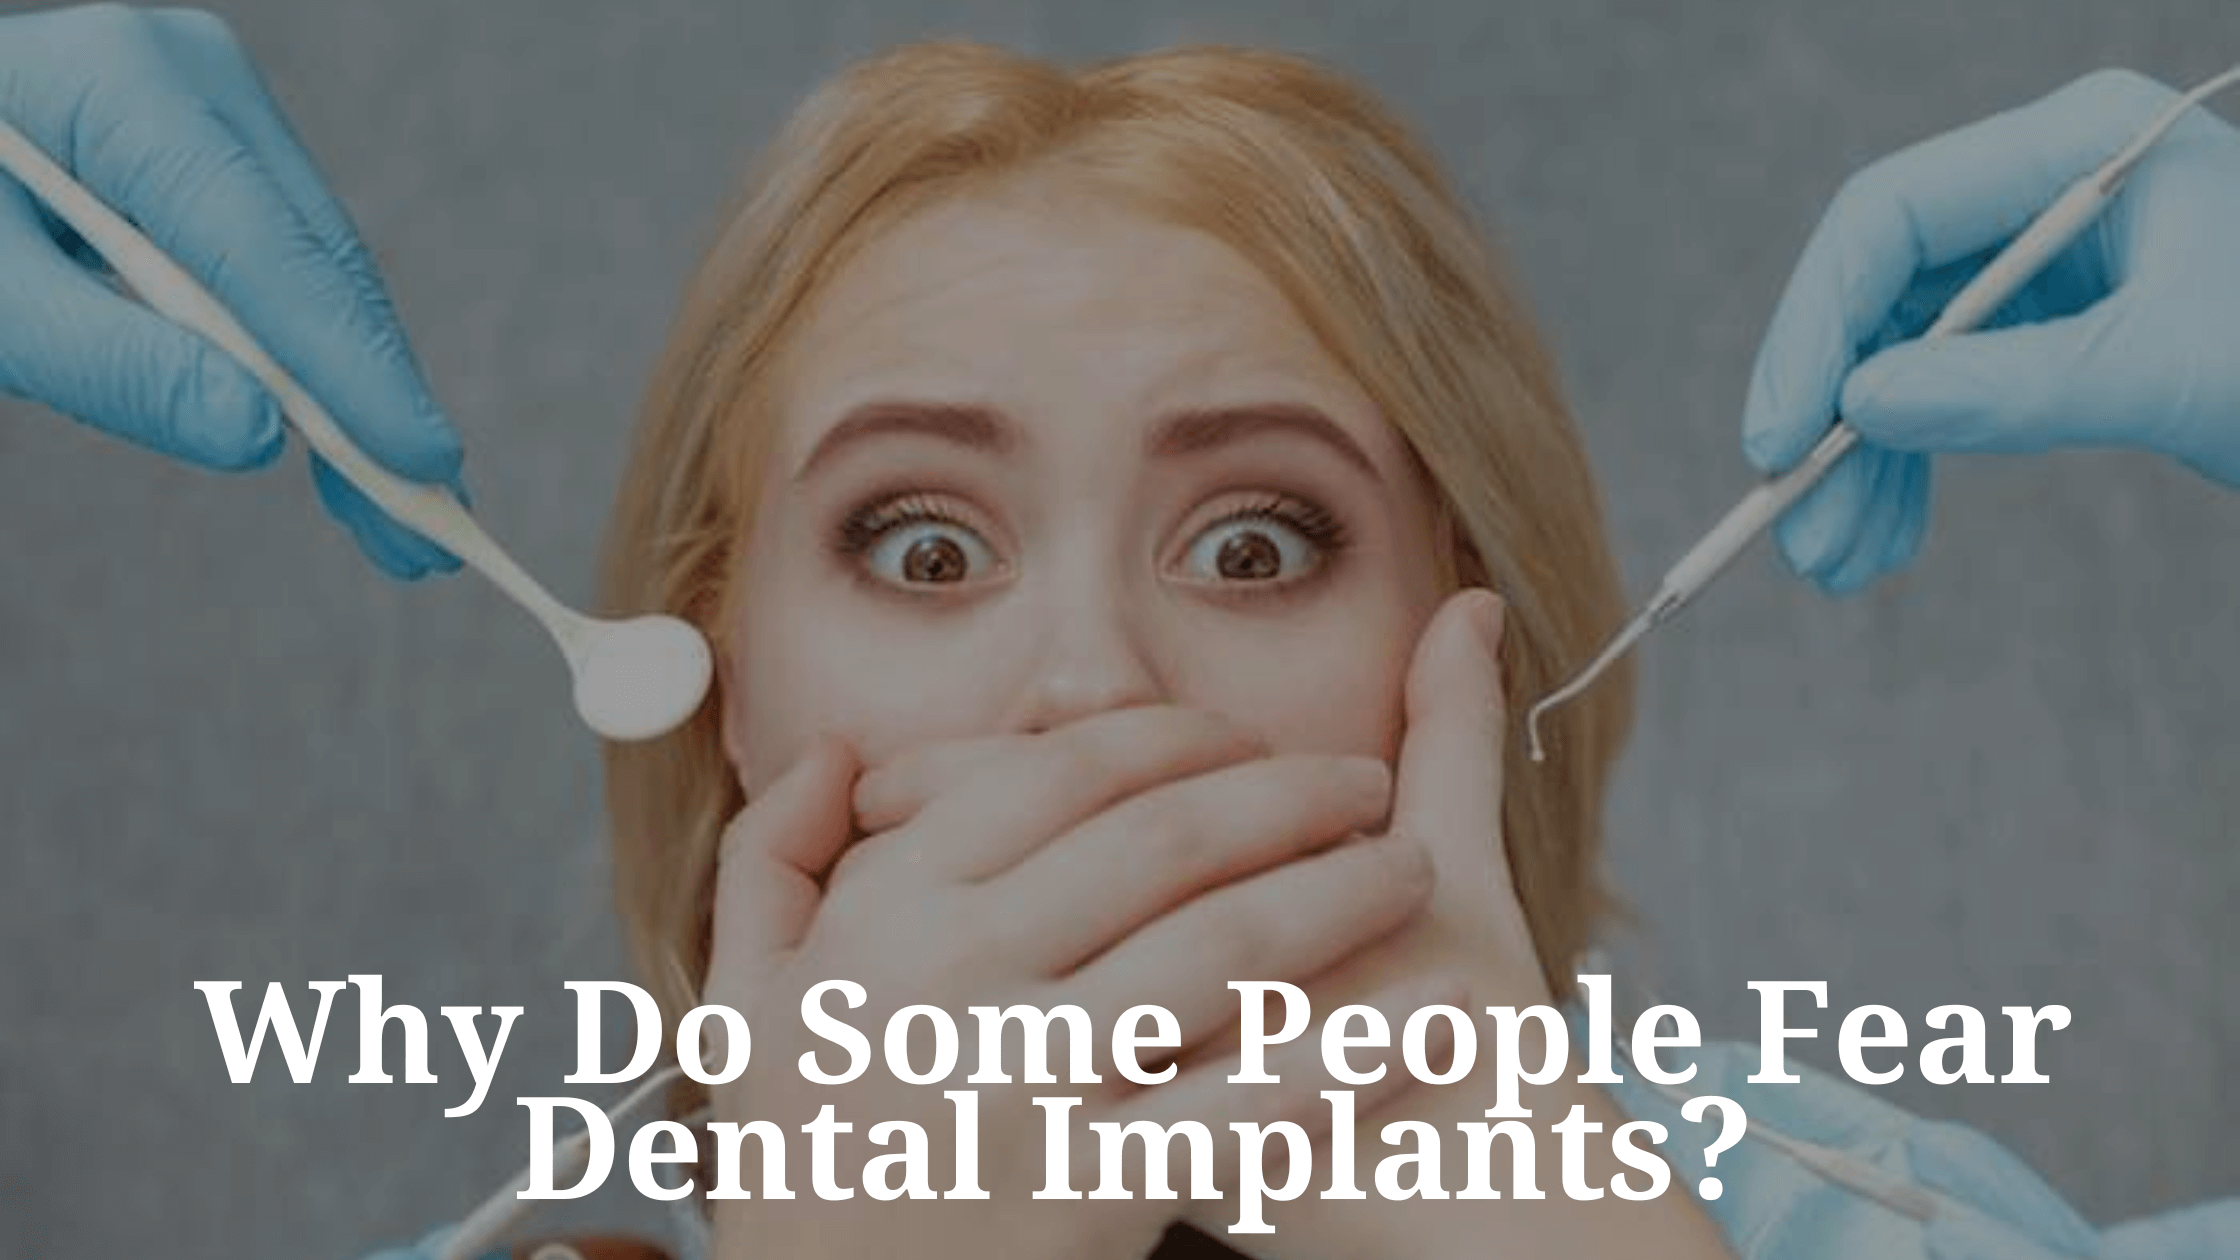 Why Do Some People Fear Dental Implants